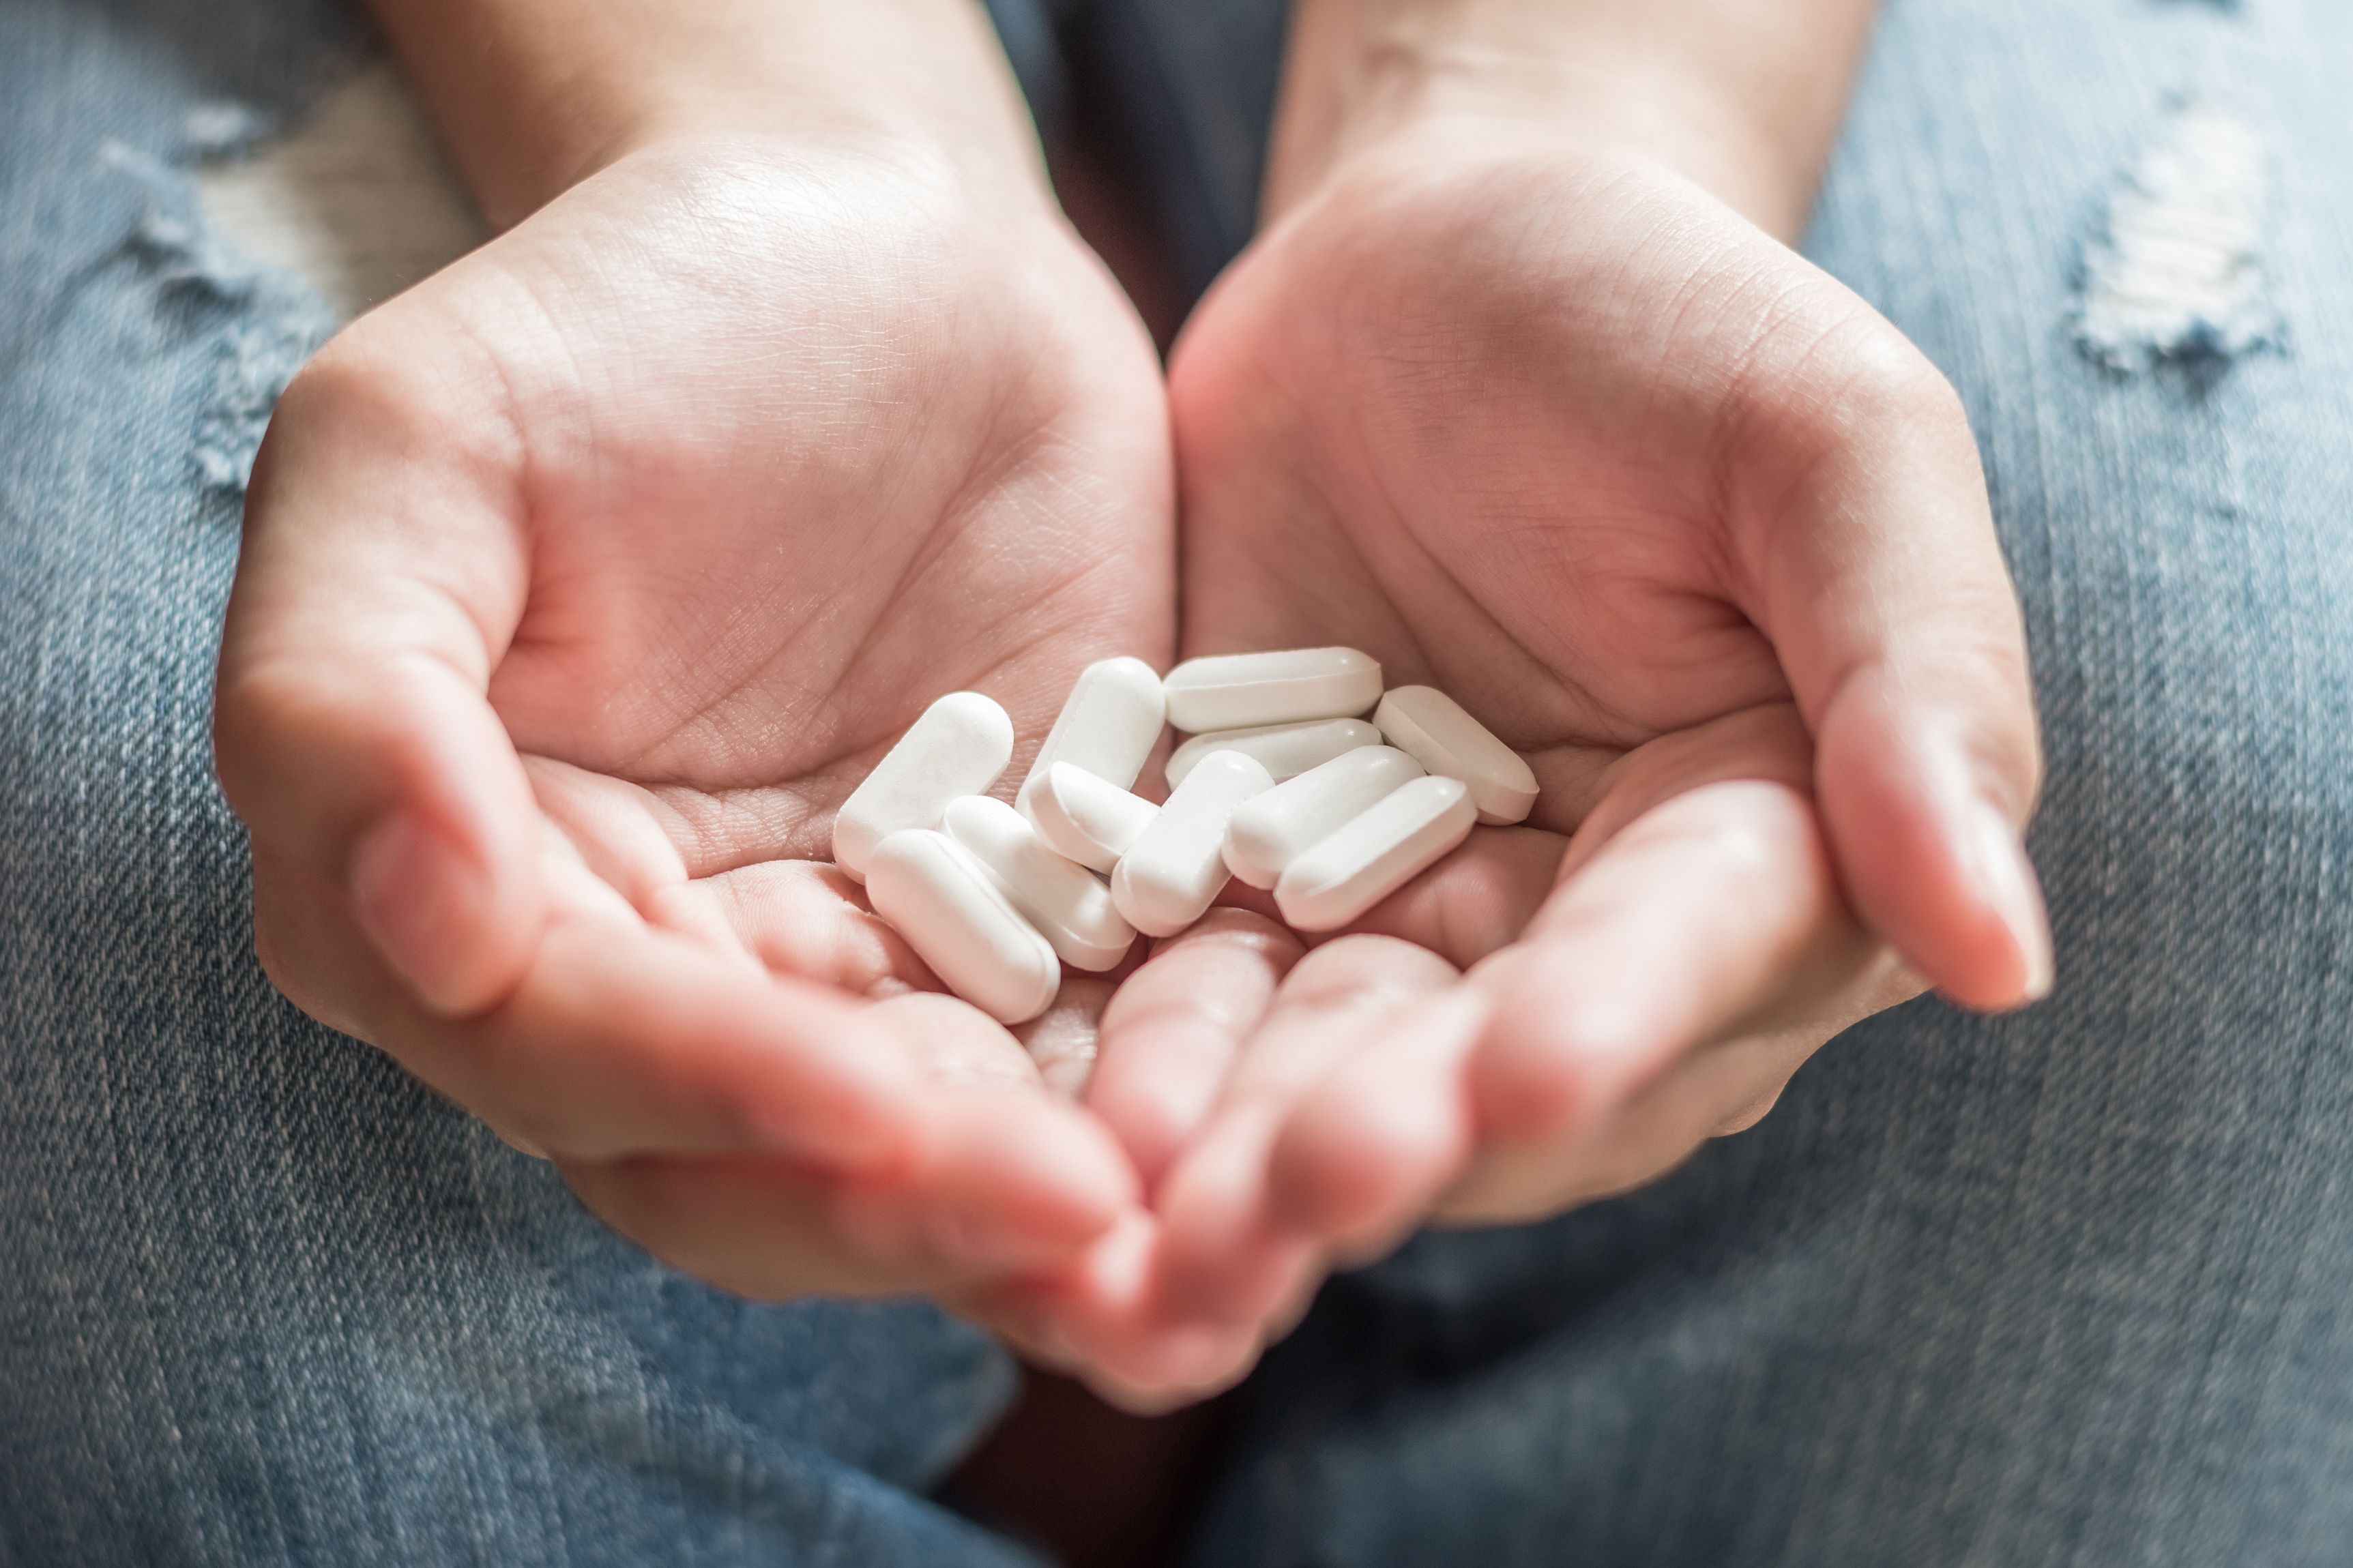 Long-term paracetamol use may be a risk for people with high blood